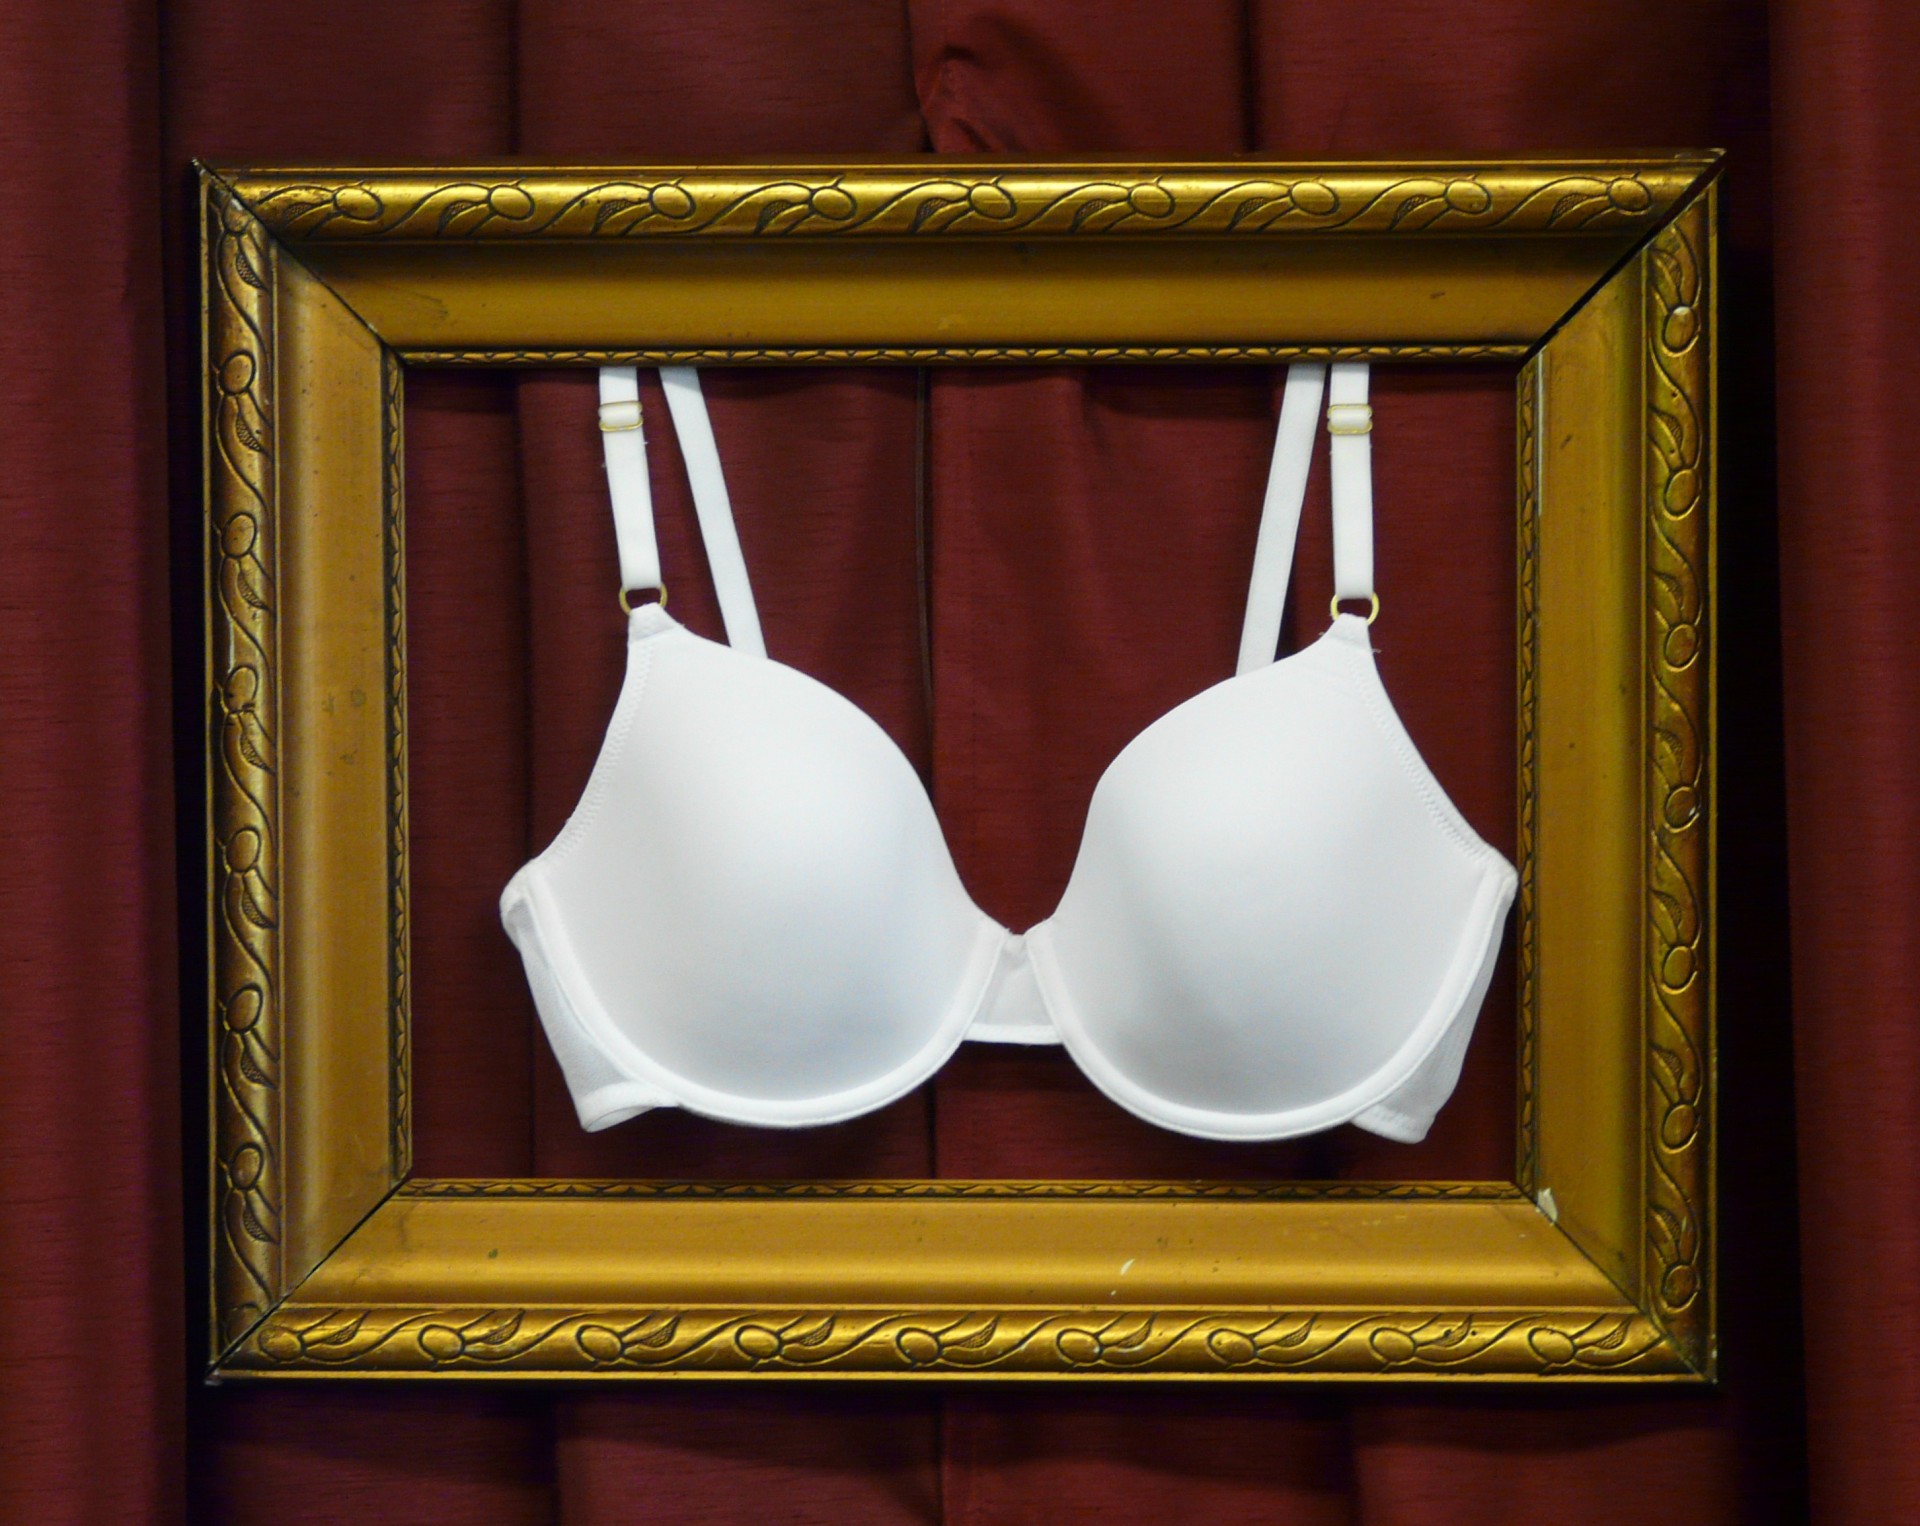 Download free photo of Bra,picture,frame,modern art,bra-art - from